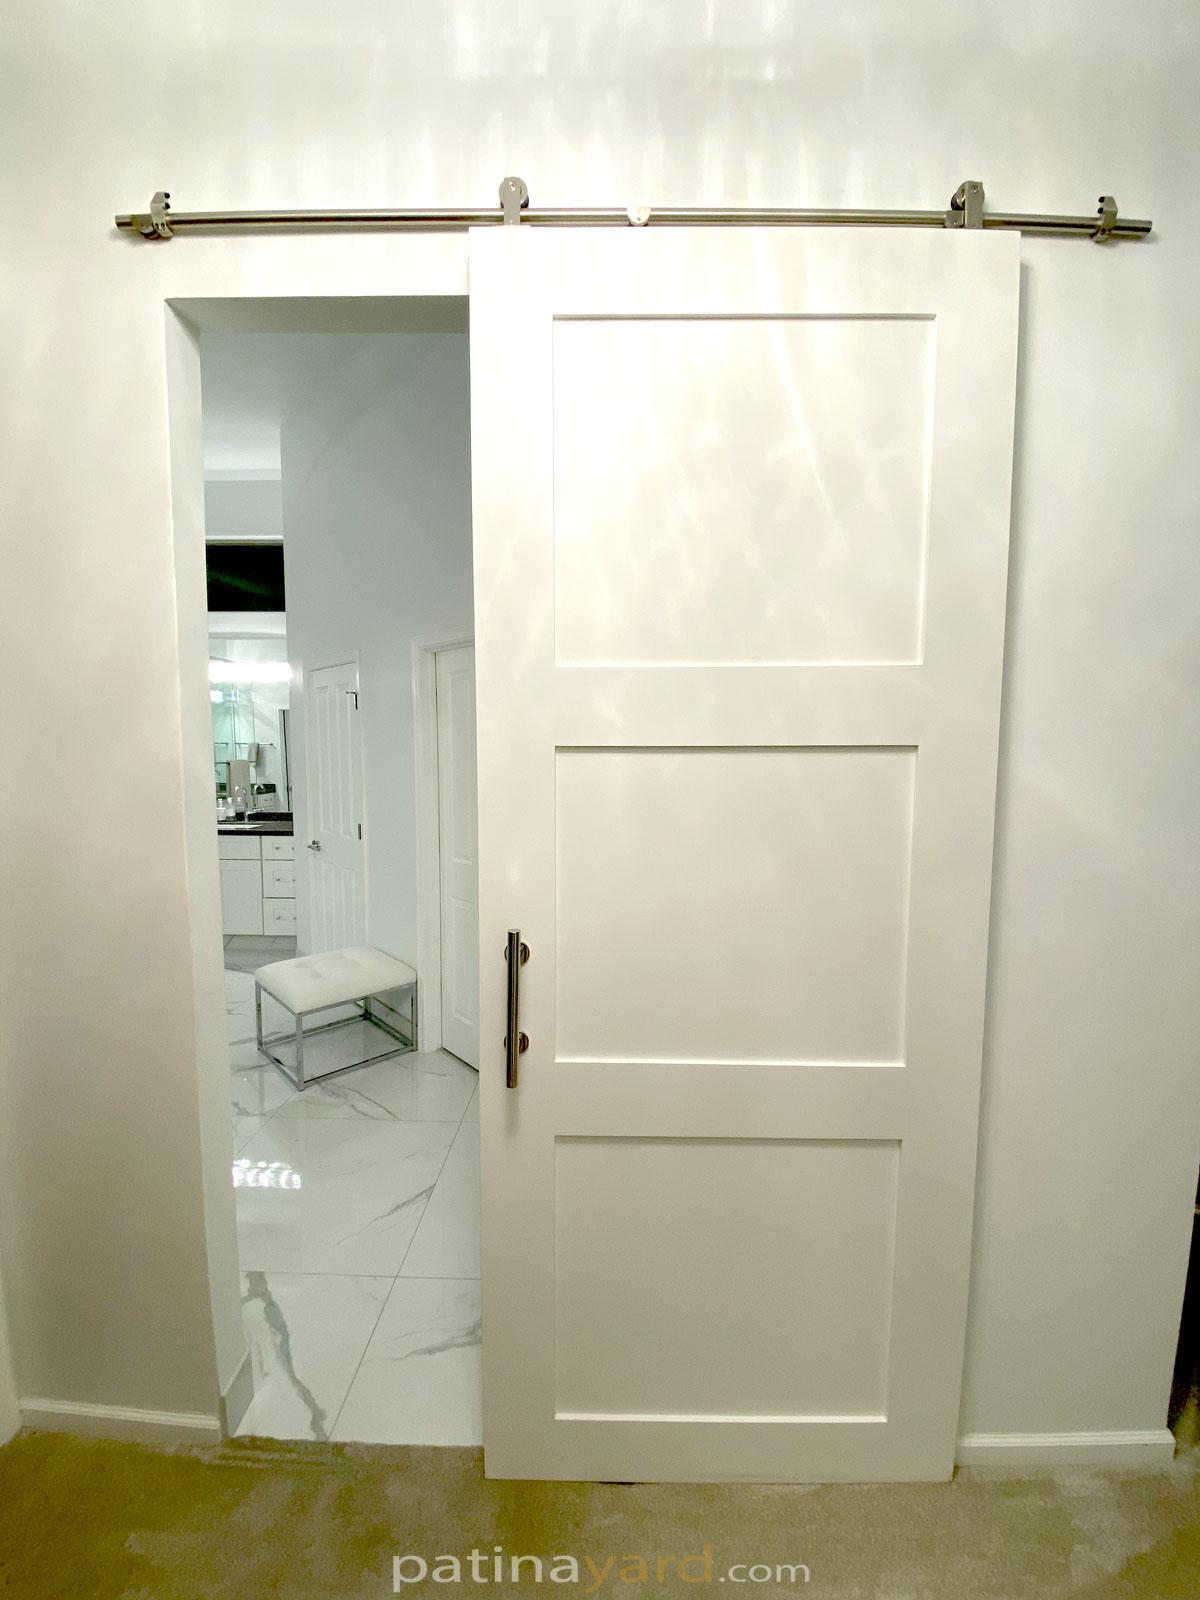 painted white shaker style barn door with stainless steel hardware